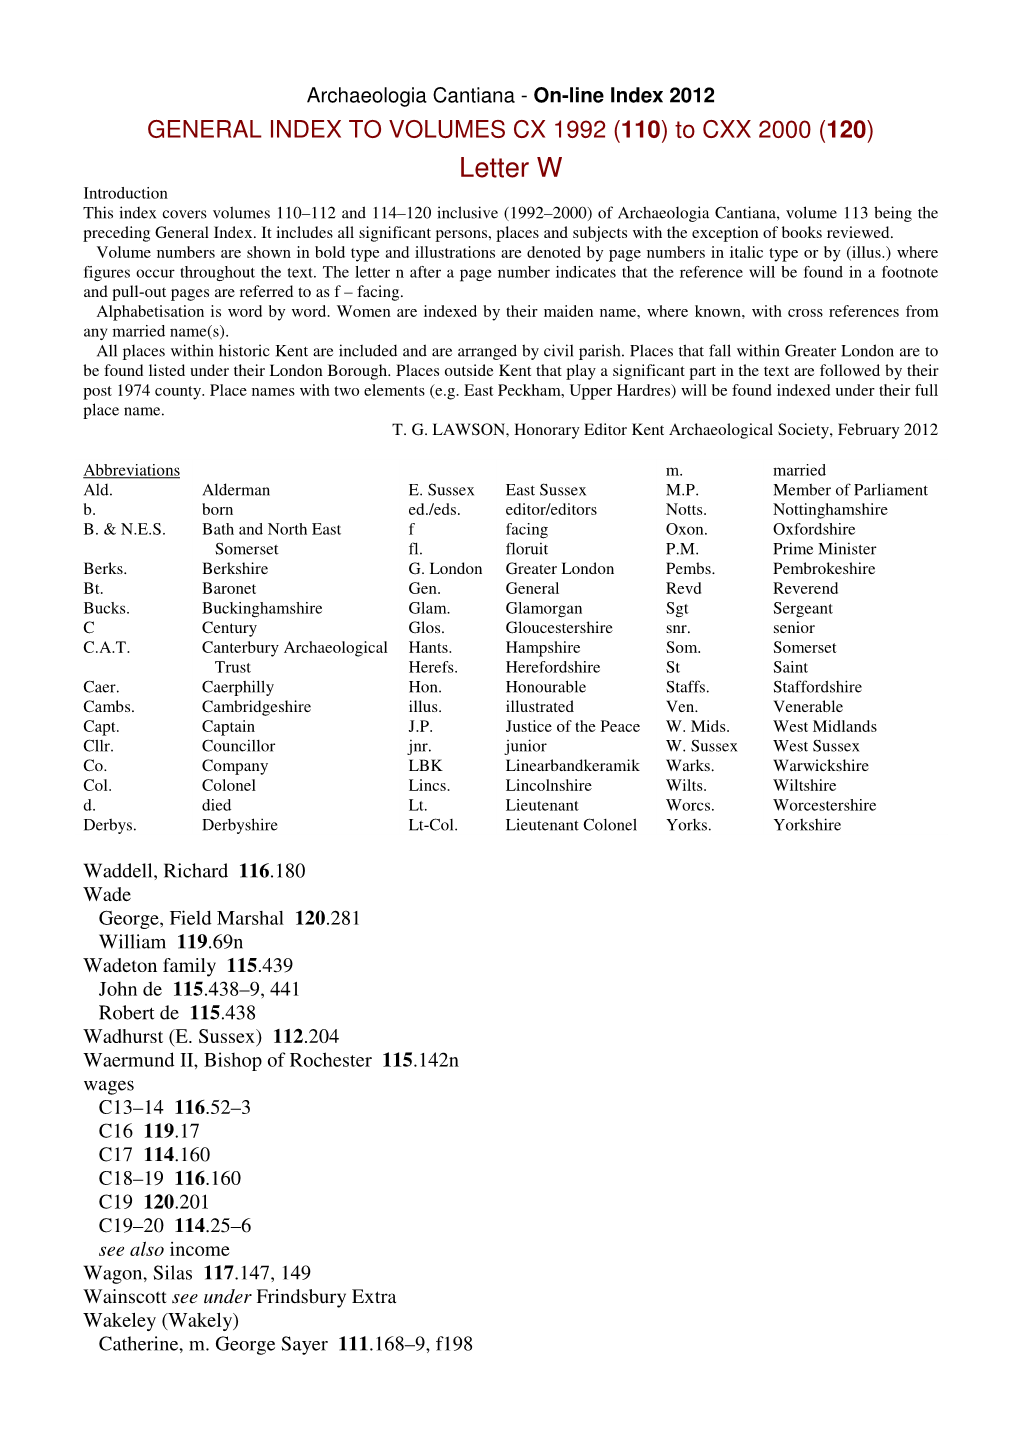 Letter W Introduction This Index Covers Volumes 110–112 and 114–120 Inclusive (1992–2000) of Archaeologia Cantiana, Volume 113 Being the Preceding General Index